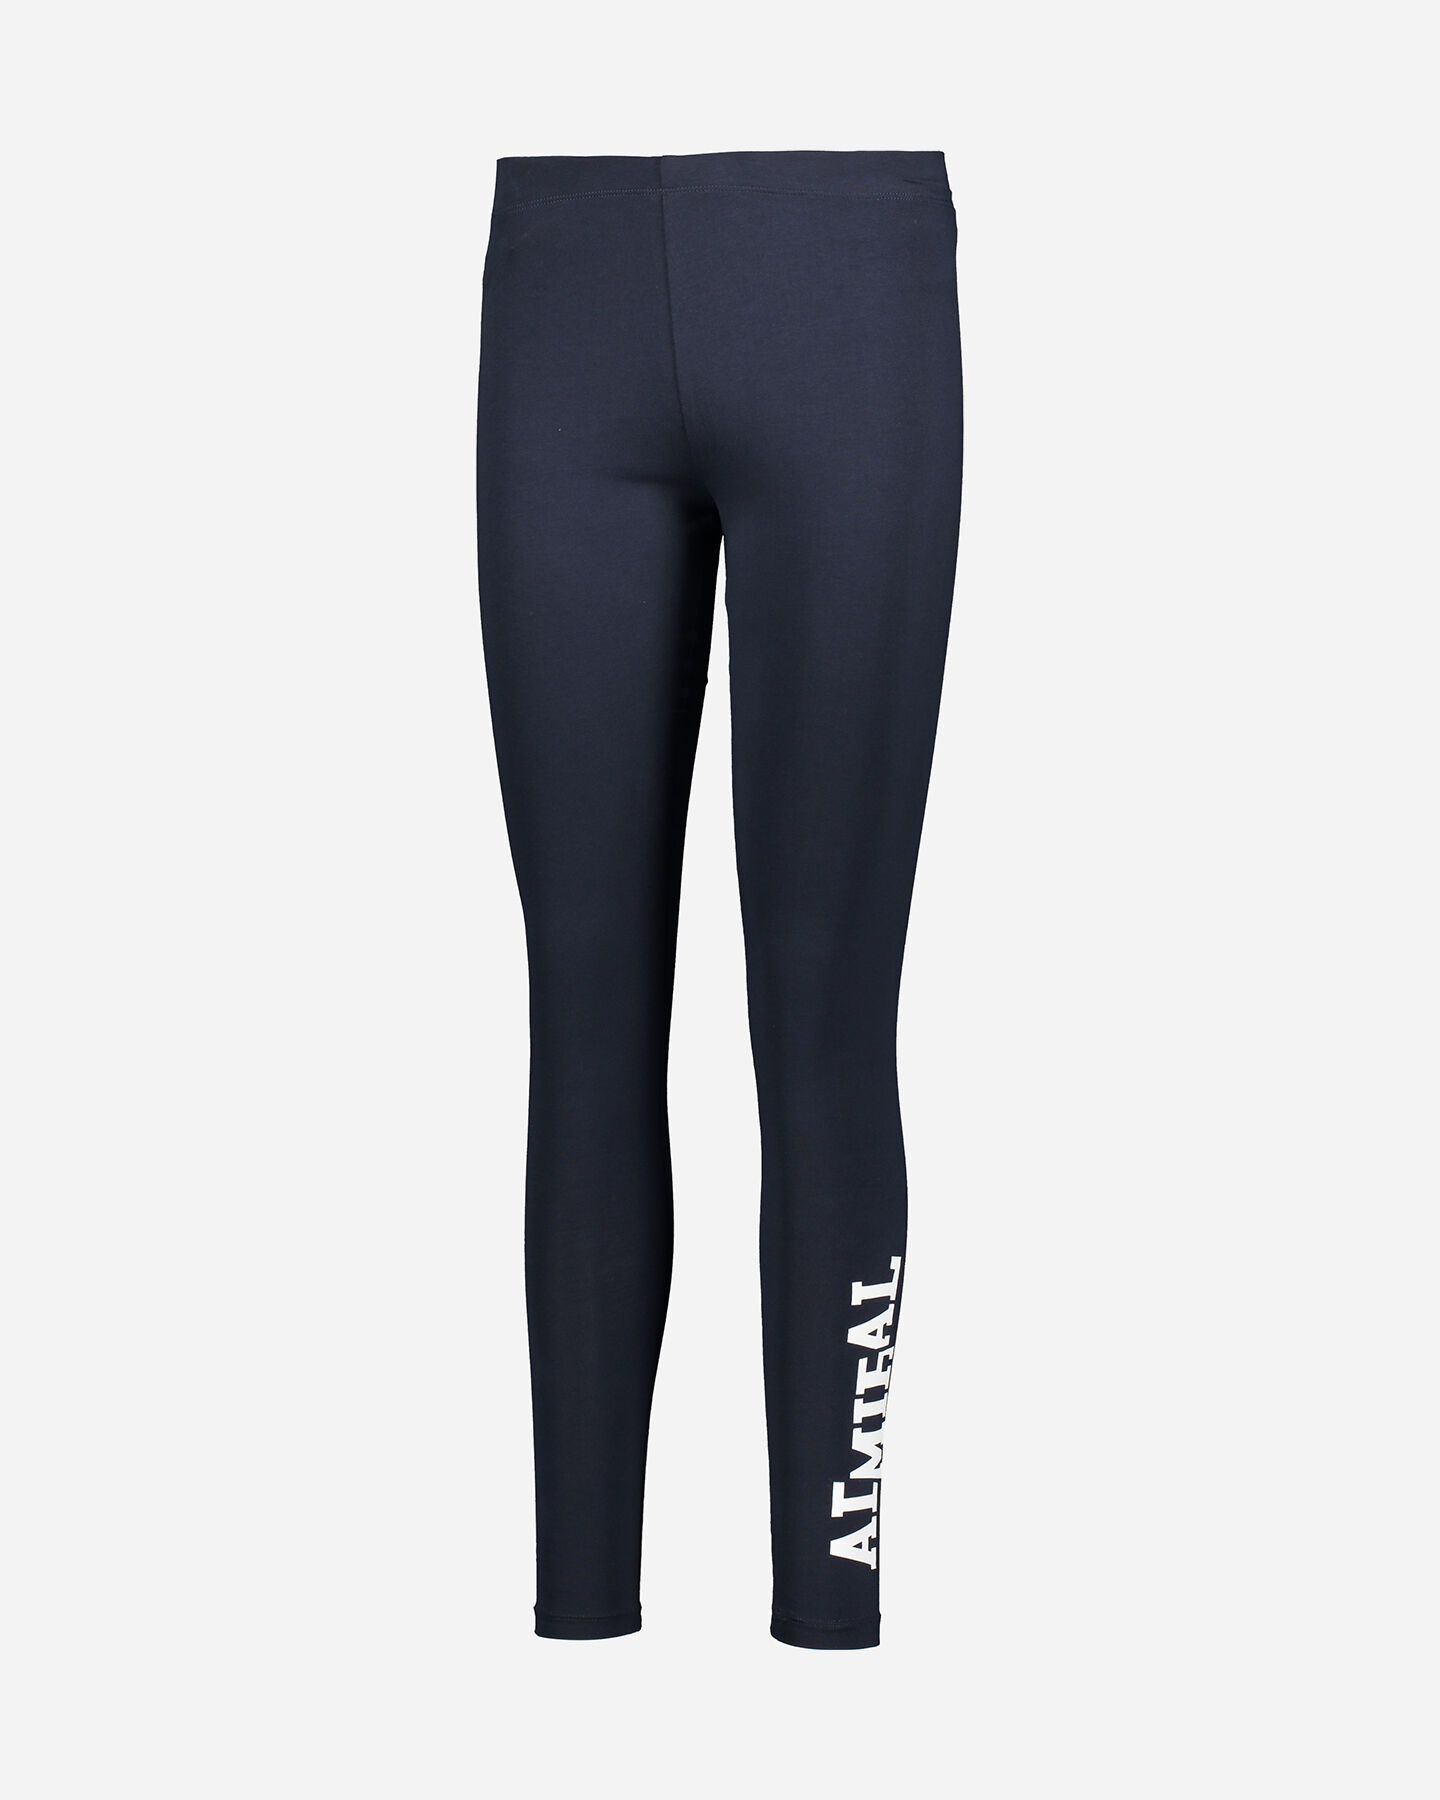  Leggings ADMIRAL JSTRETCH NEW LOGO W S4087754|914|XS scatto 0